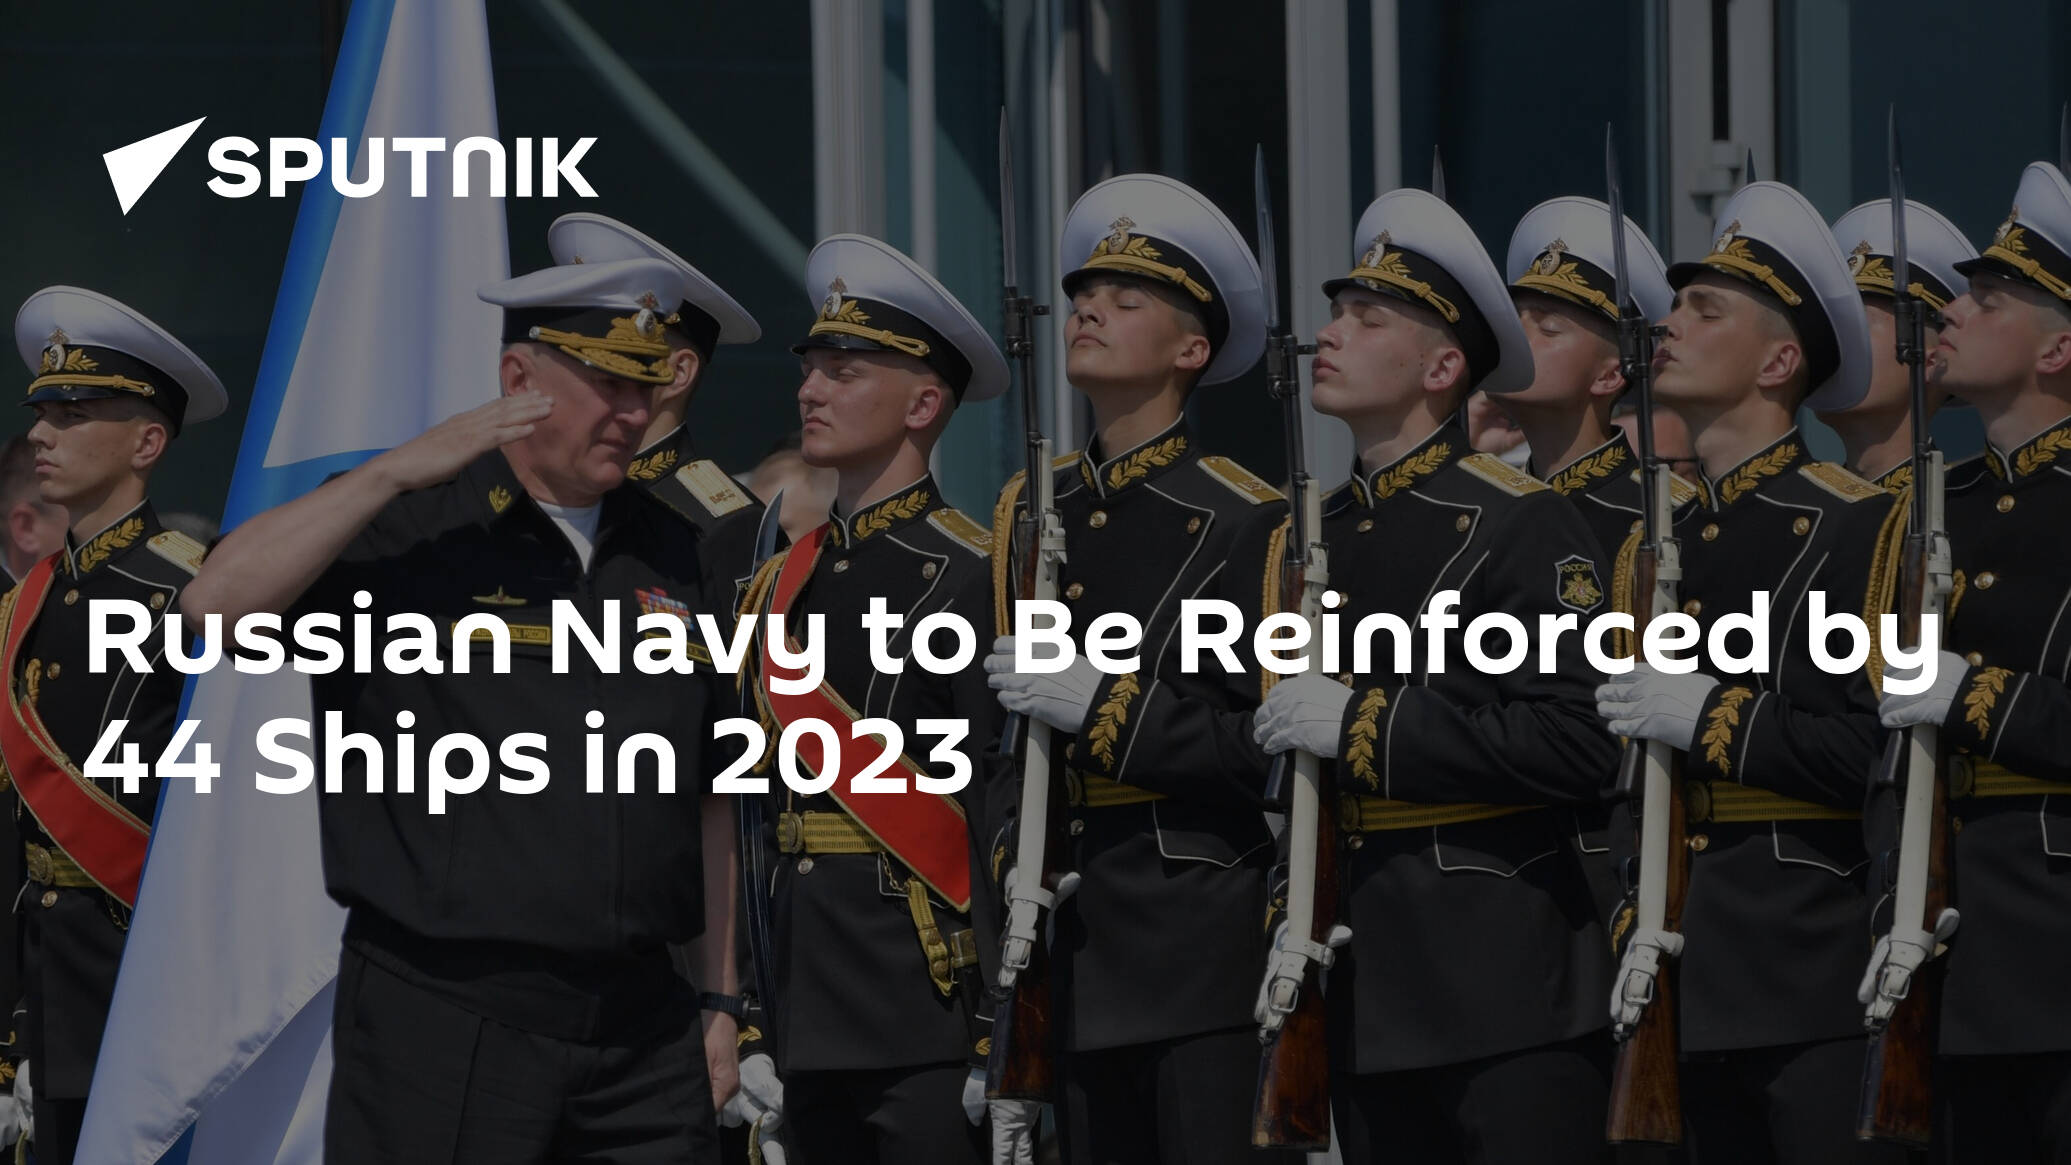 Russian Navy to Be Reinforced by 44 Ships in 2023